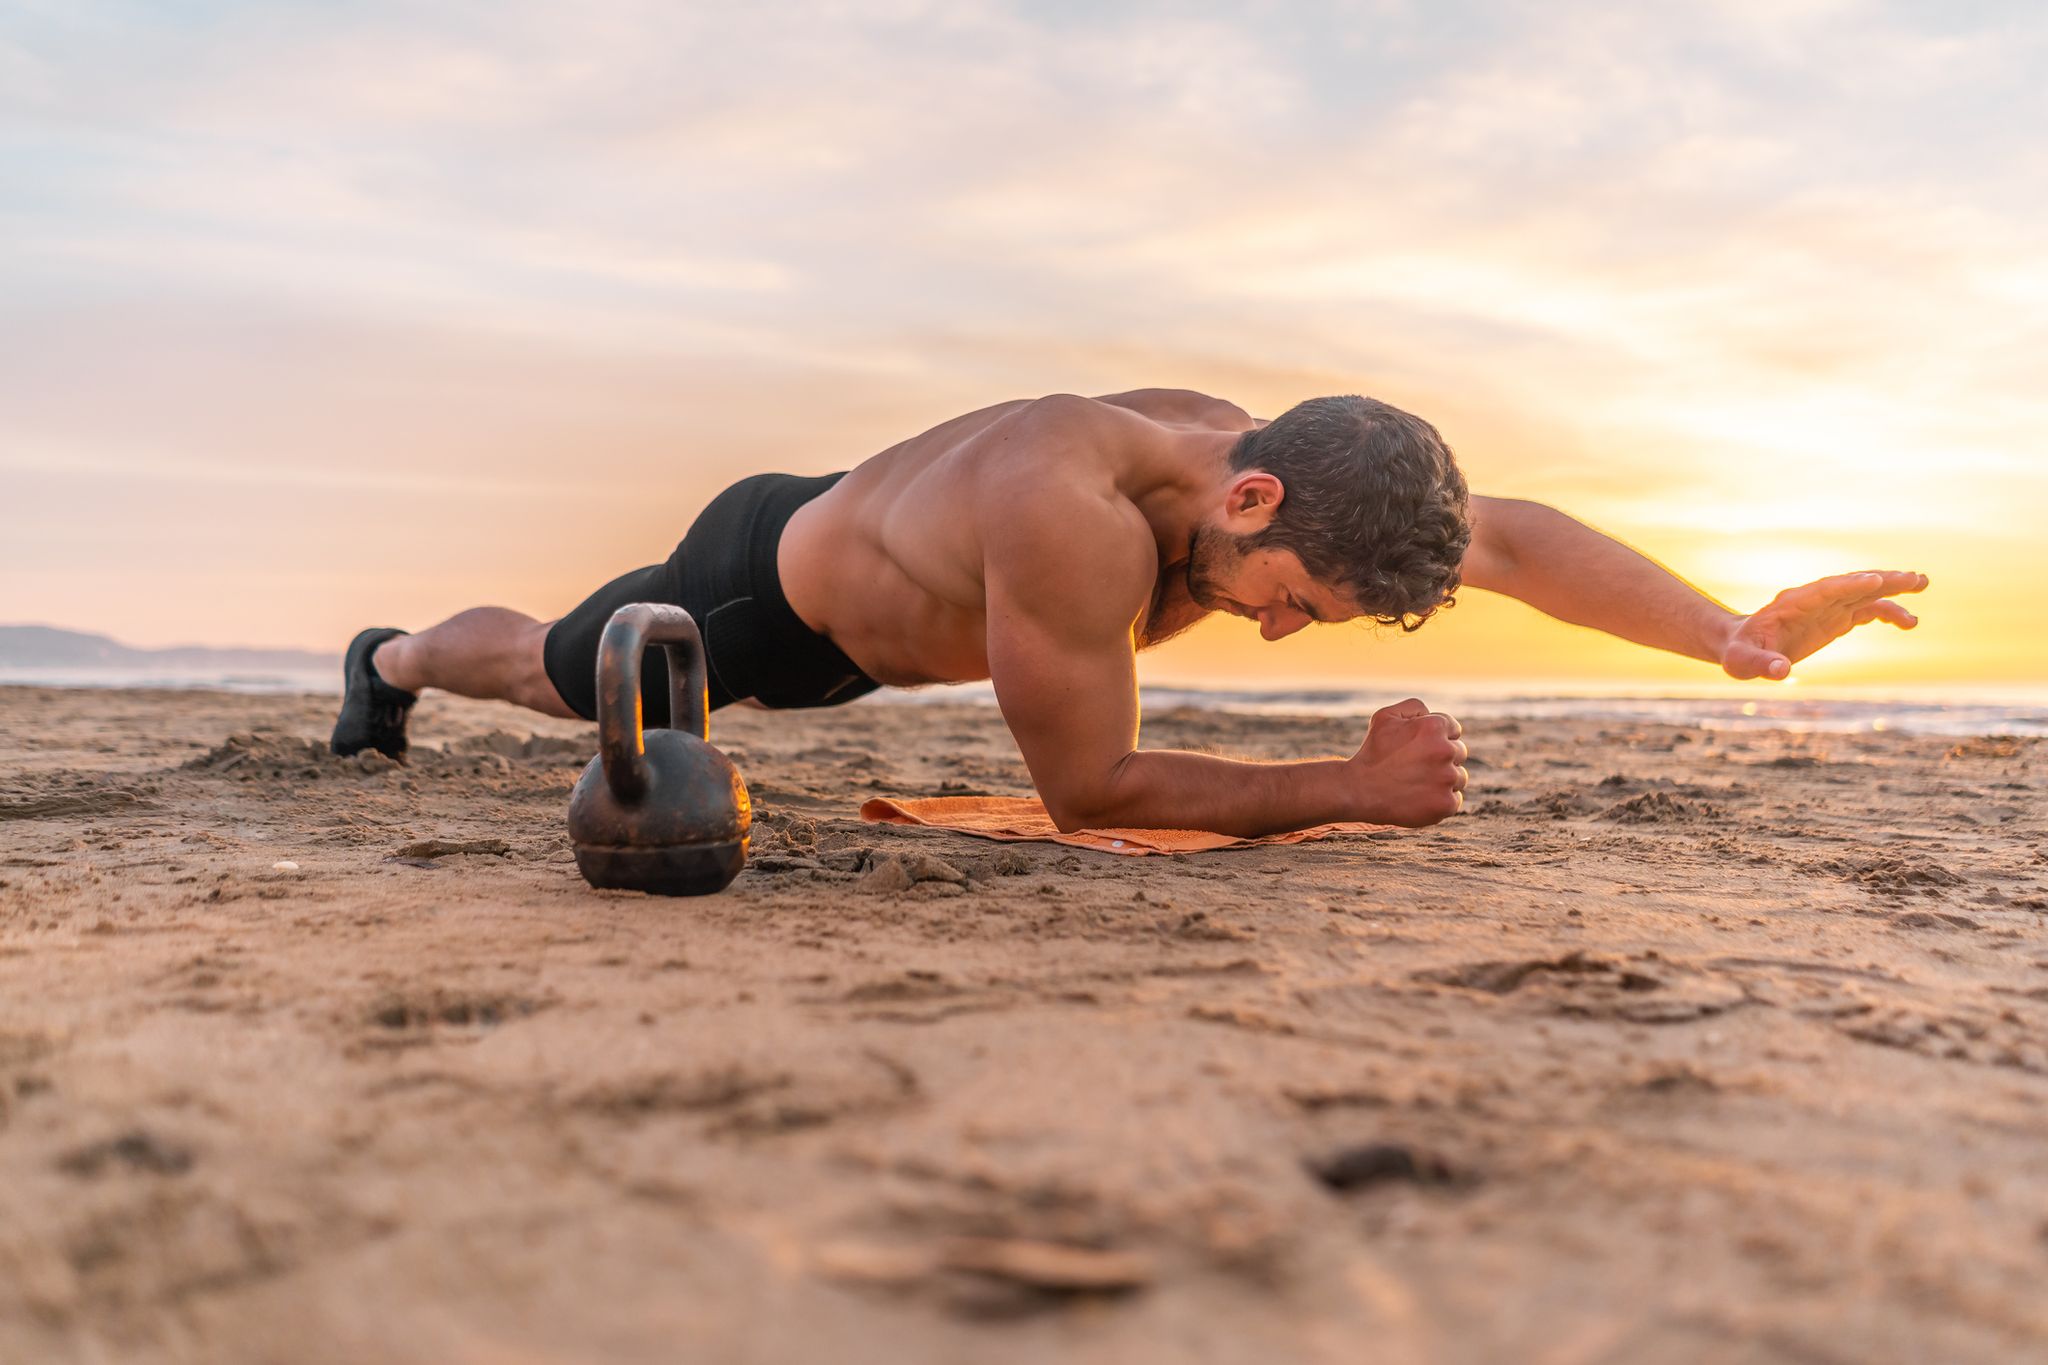 https://hips.hearstapps.com/hmg-prod/images/muscular-hispanic-man-doing-plank-on-the-beach-at-royalty-free-image-1680697280.jpg?crop=1.00xw:1.00xh;0,0&resize=2048:*